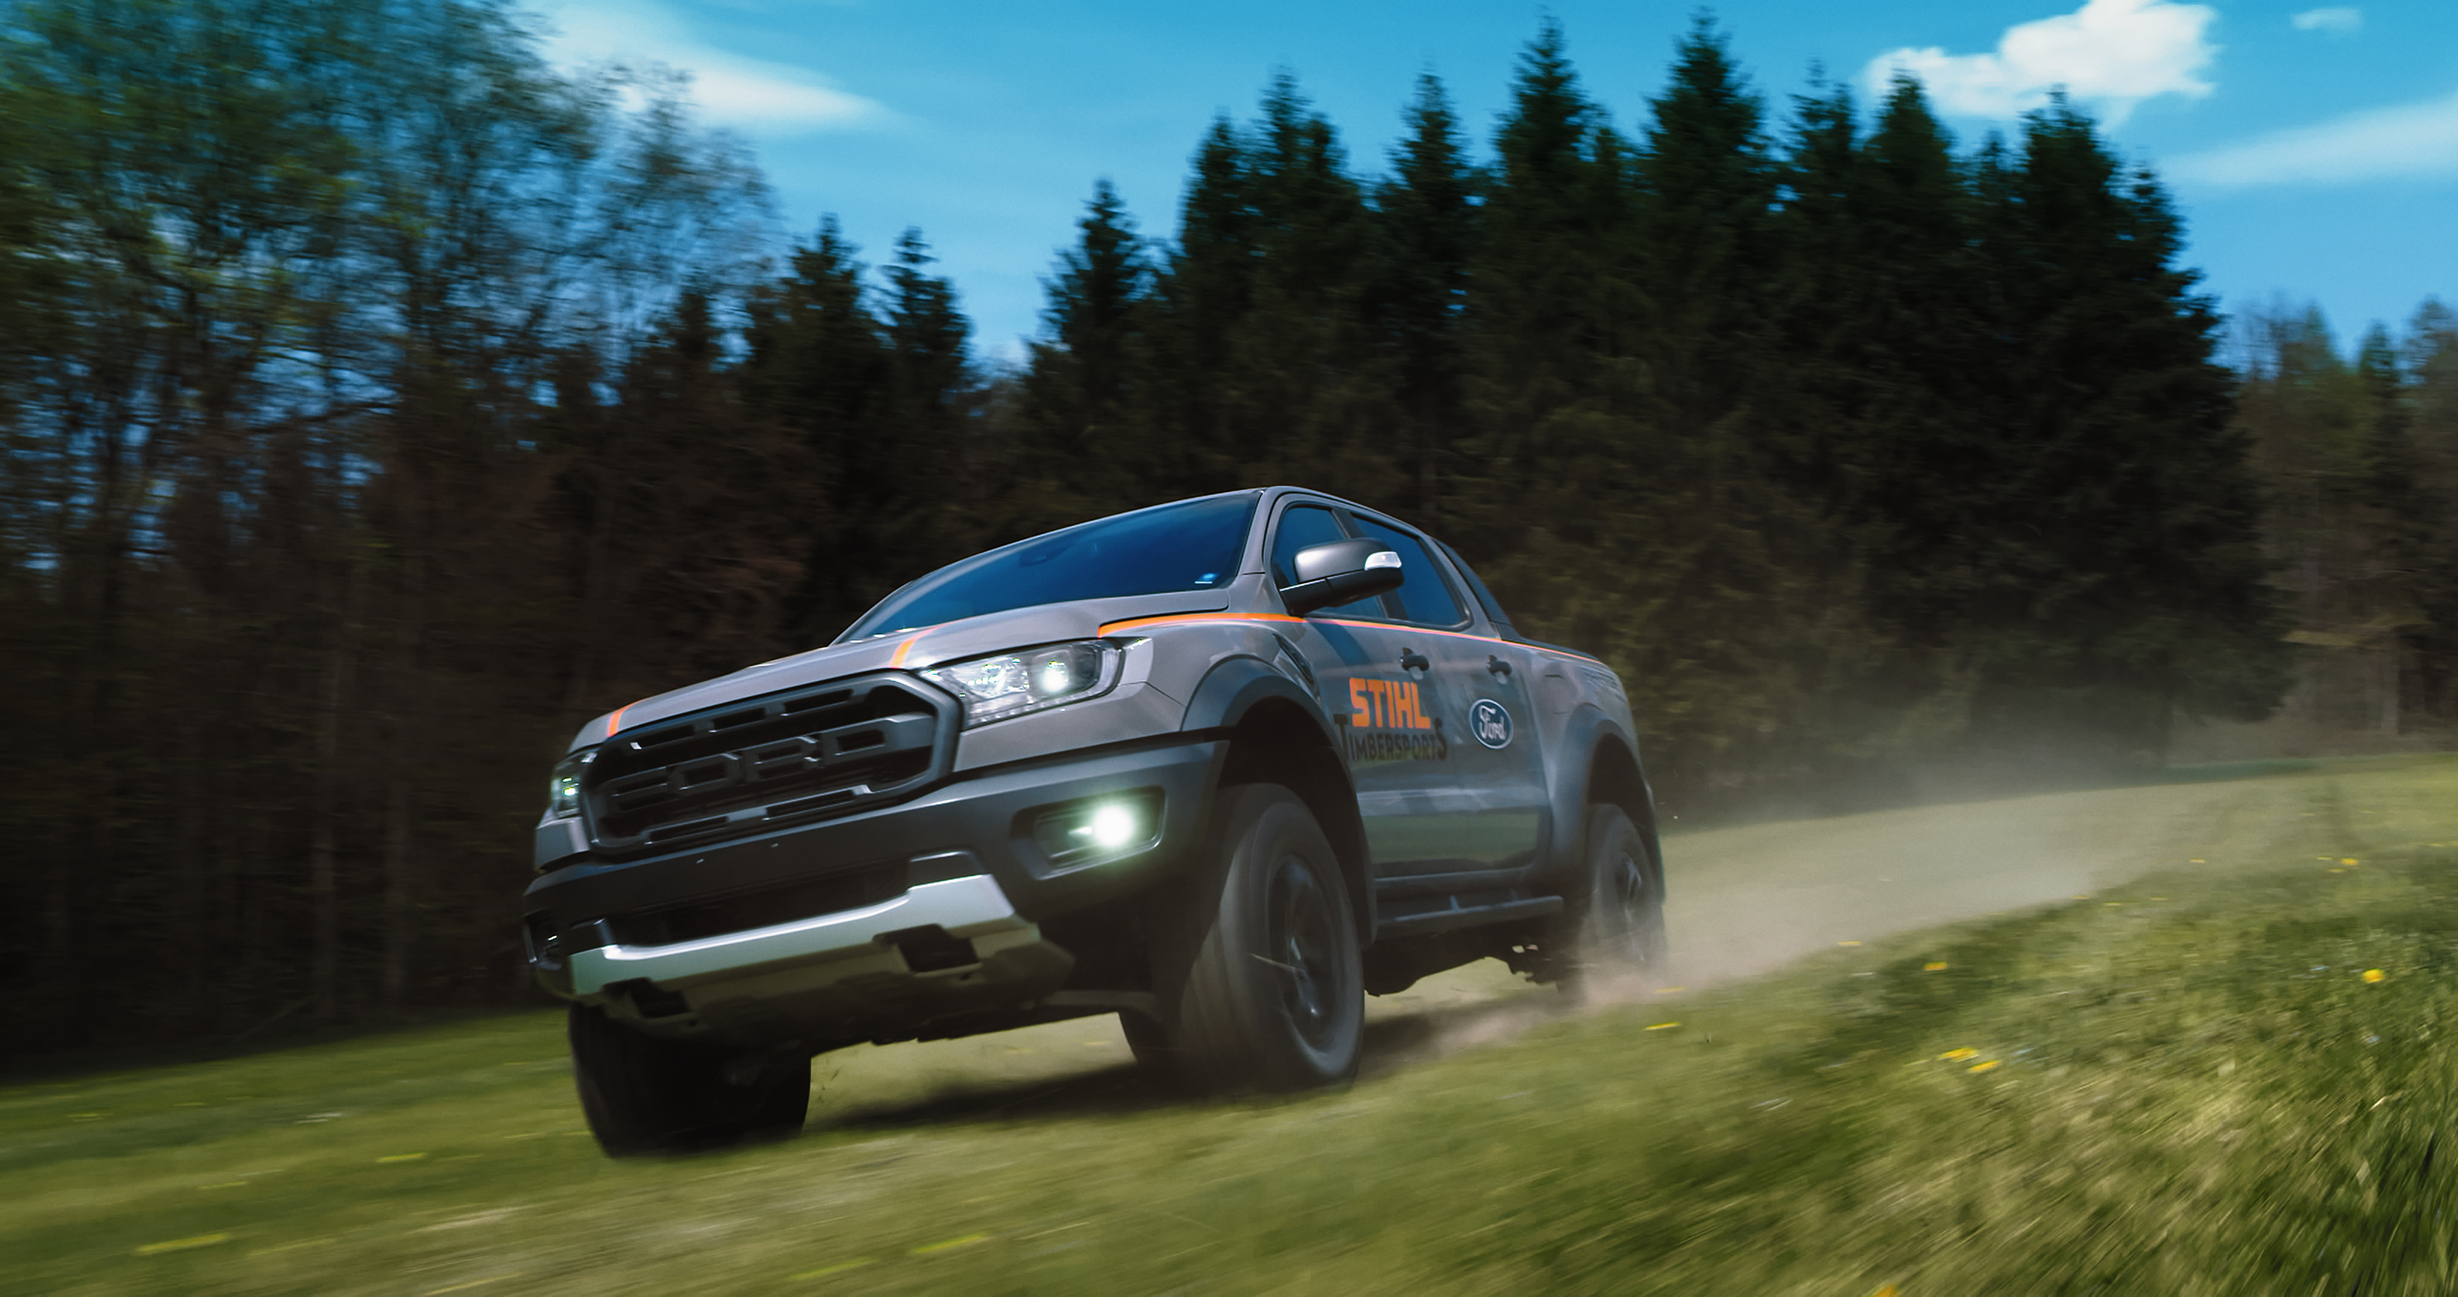 Ford Ranger Raptor in action with STIHL TIMBERSPORTS® branding